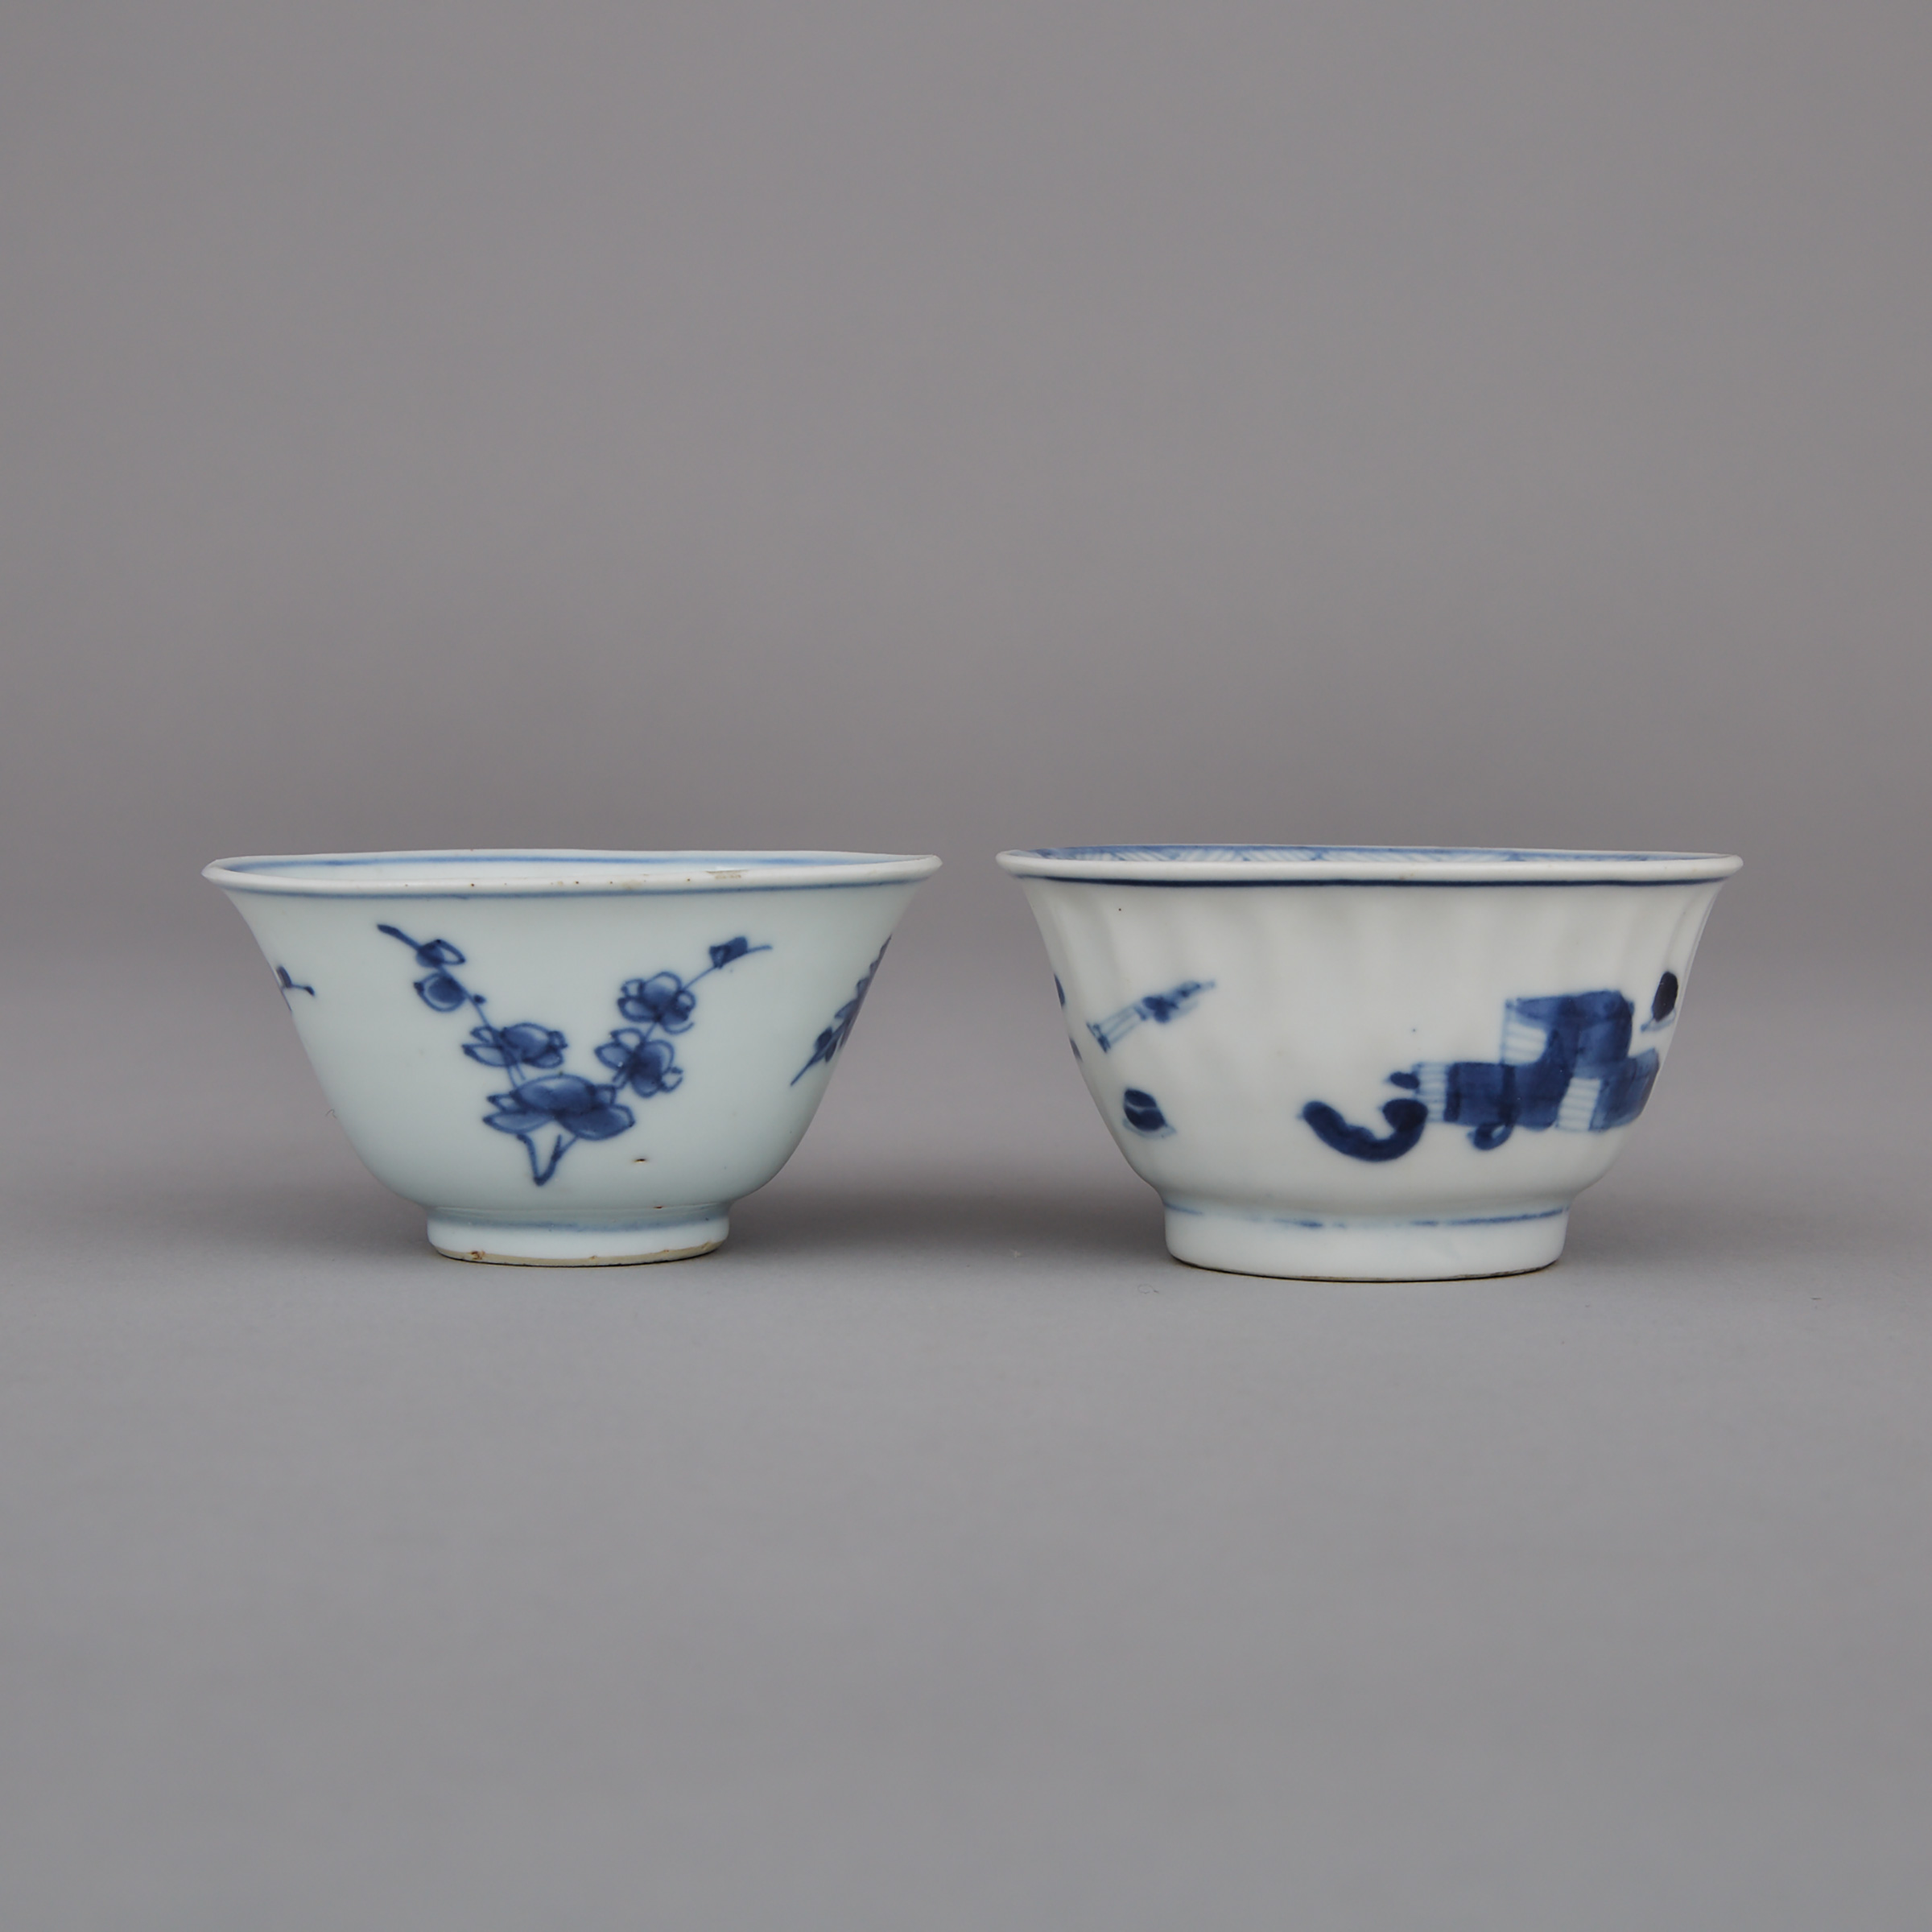 Two Chinese Export Wine Cups, Kangxi Period (1662-1722)